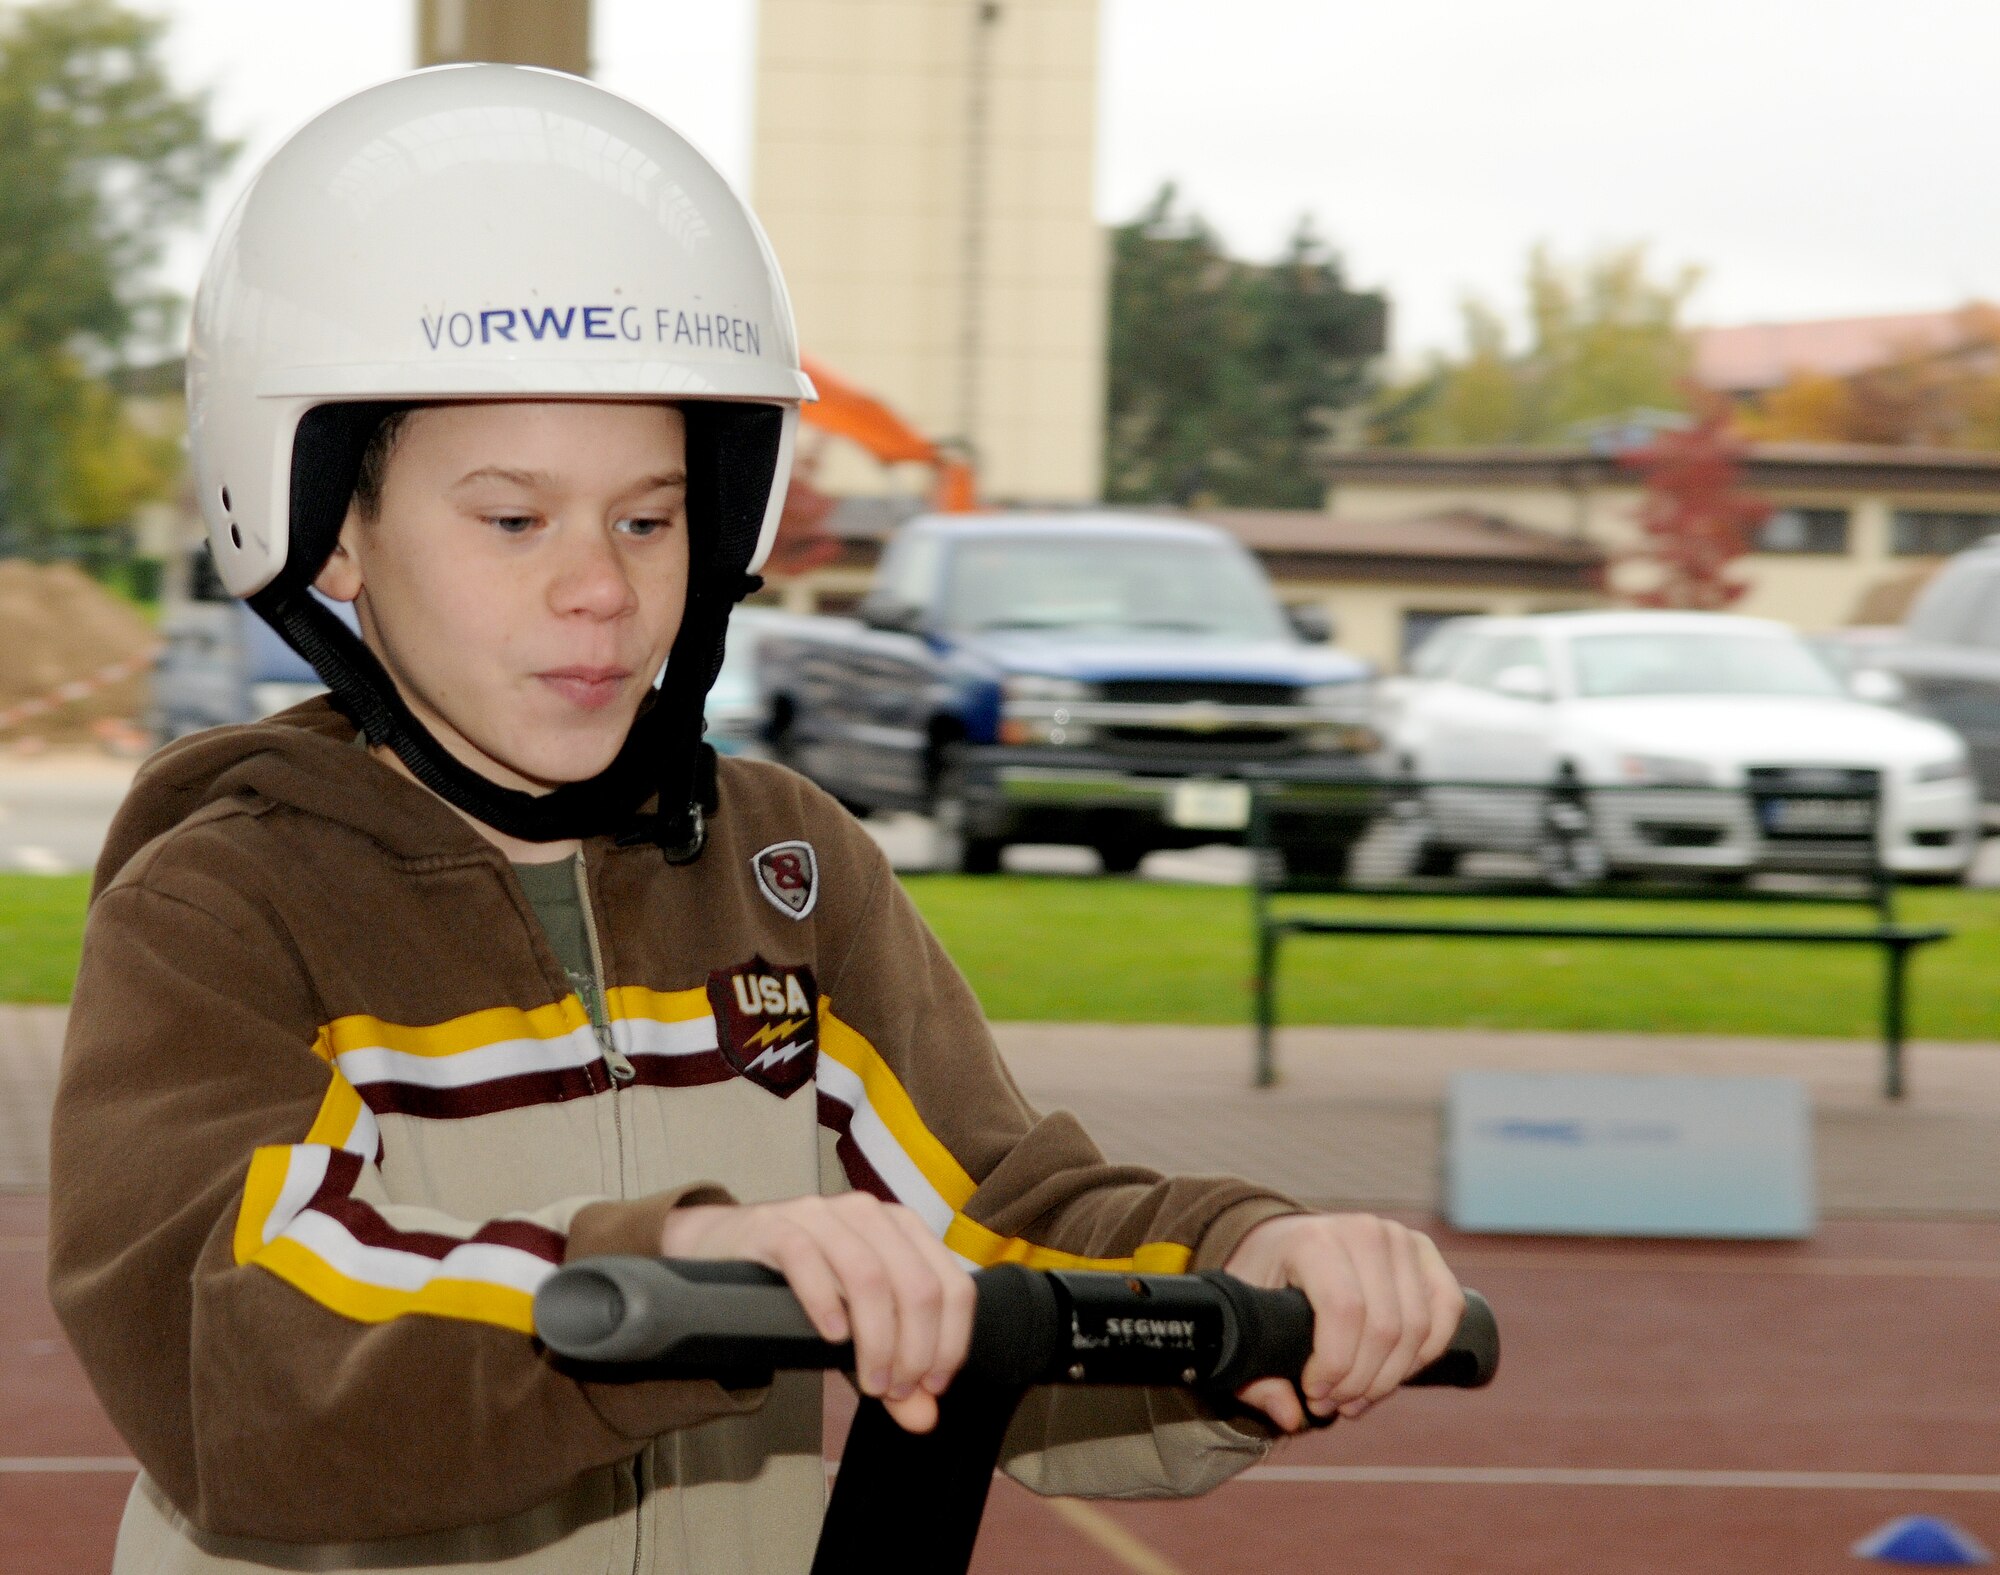 SPANGDAHLEM AIR BASE, Germany – Devin Keller, Bitburg Middle School sixth grade student, rides a Segway scooter during an Energy Awareness Month event Oct. 28. (U.S. Air Force photo/Senior Airman Nick Wilson)